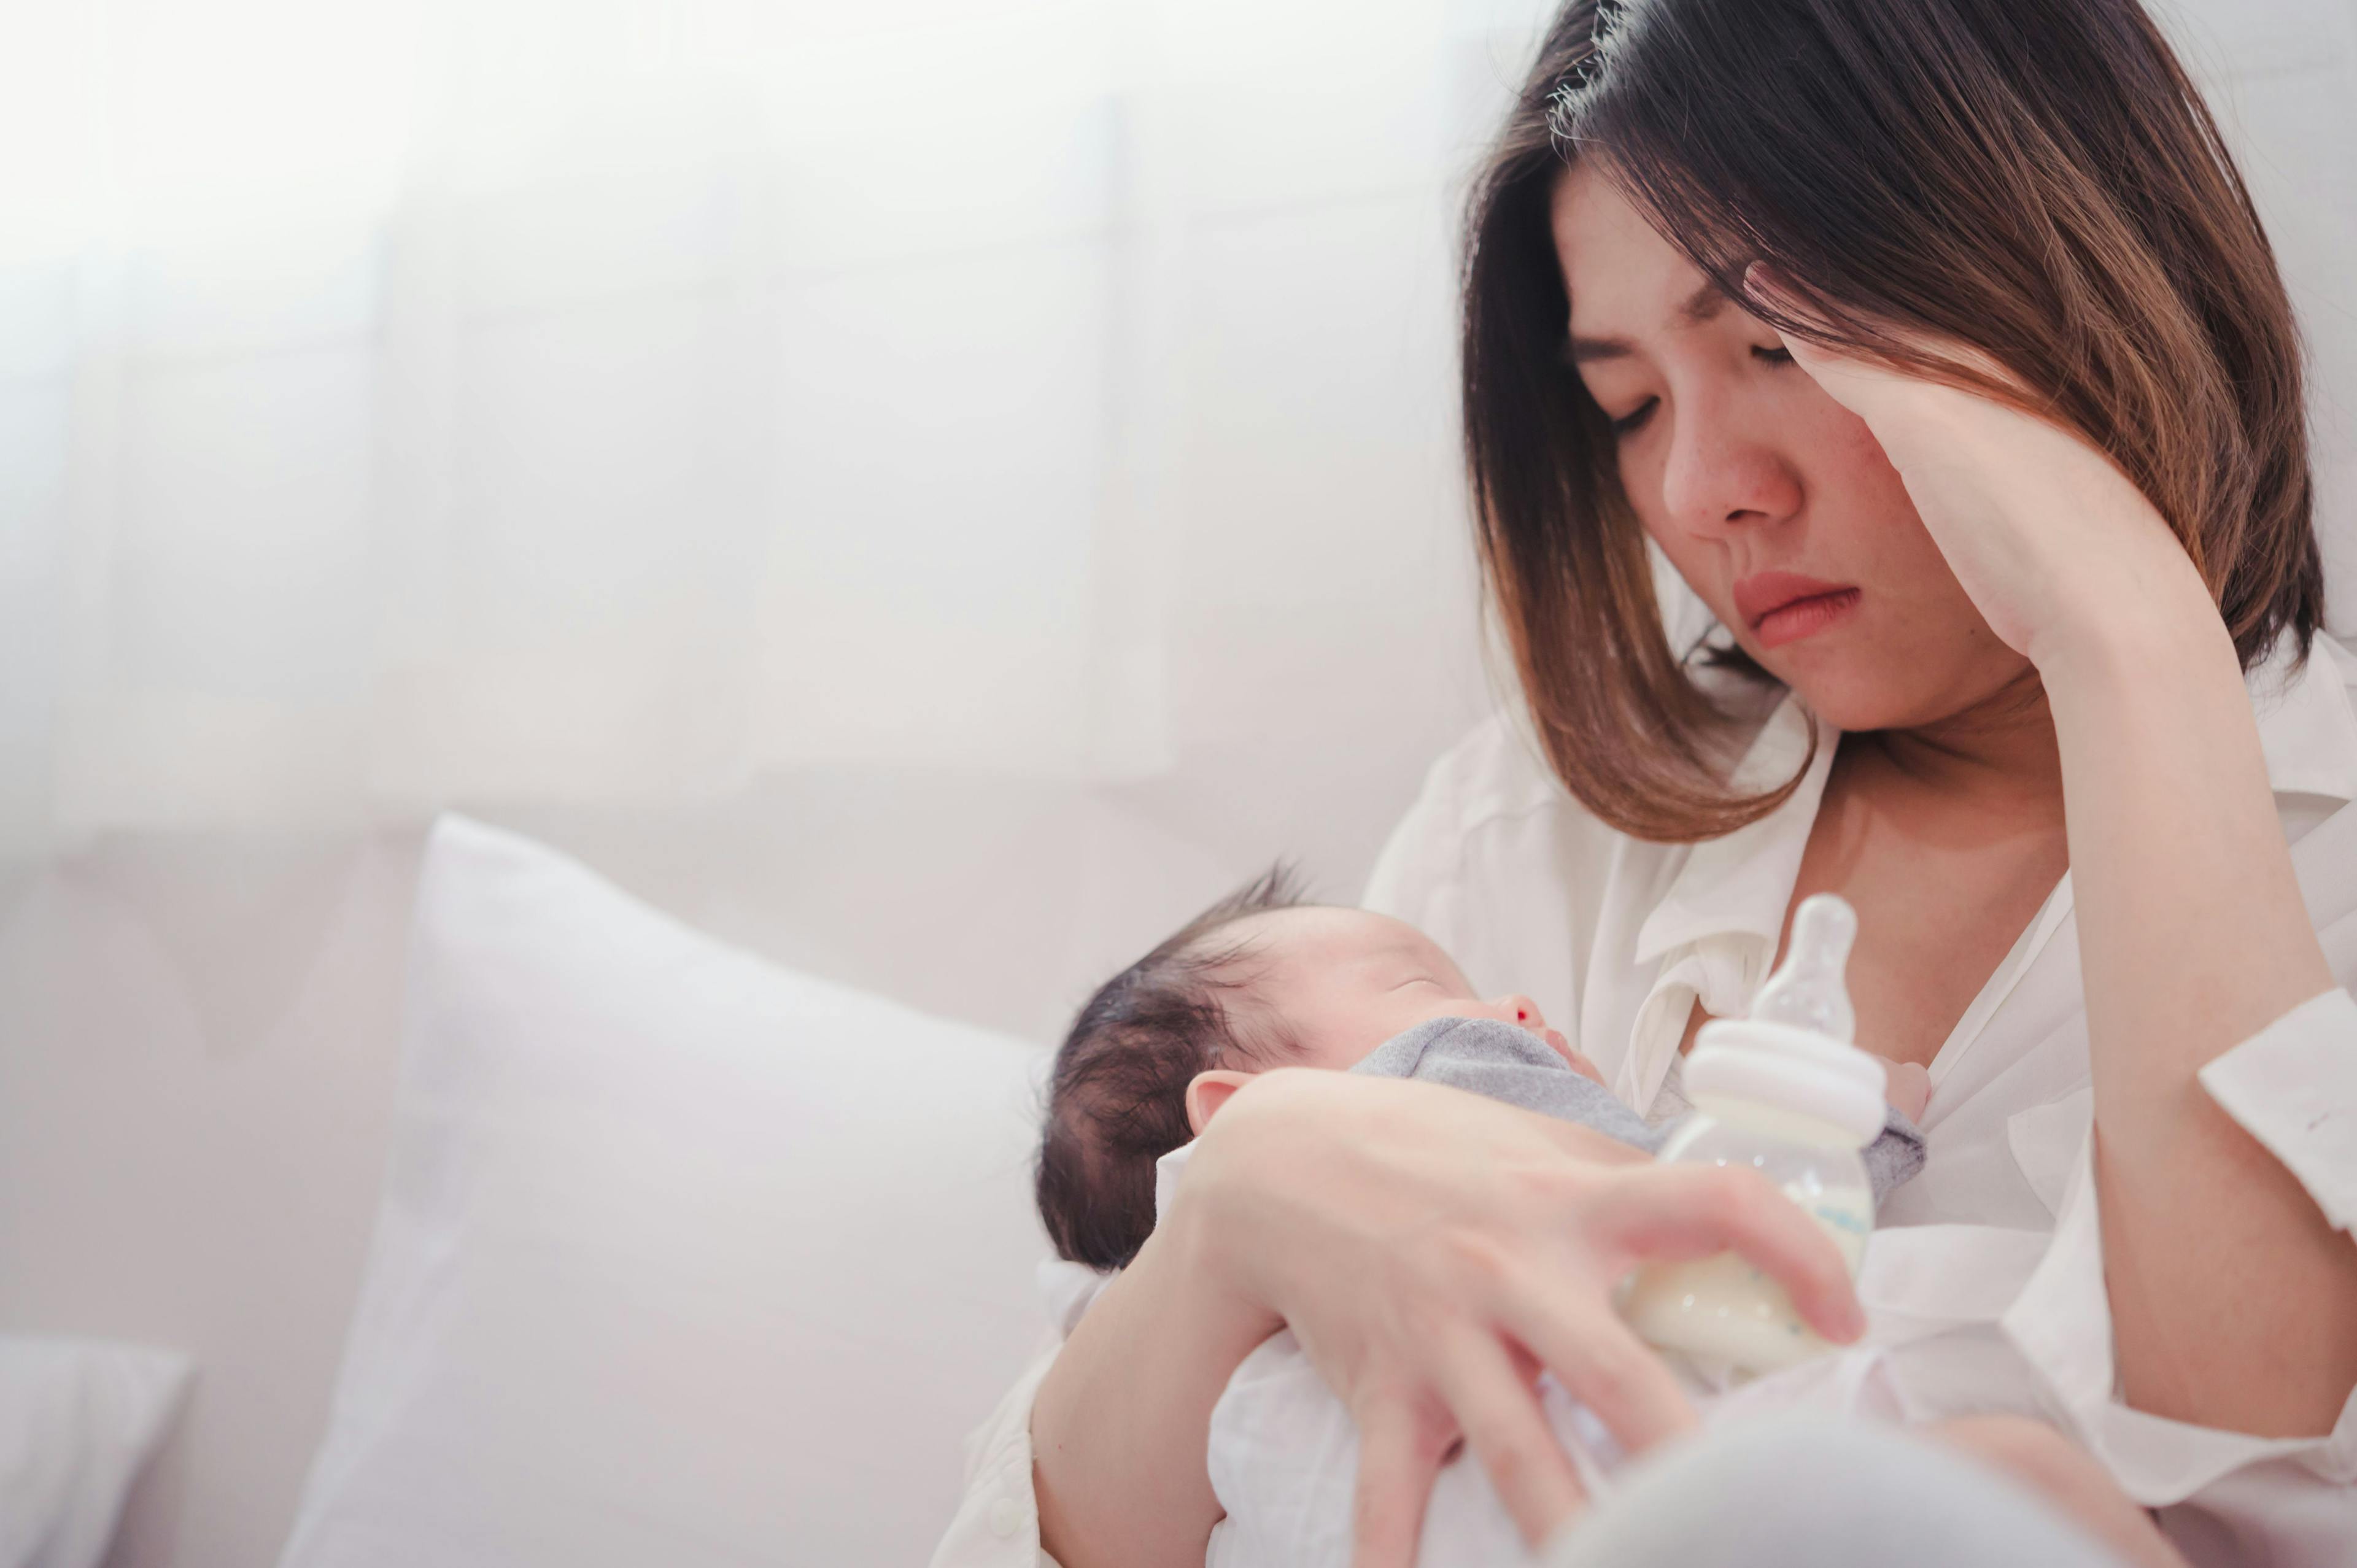 Postpartum depression may persist for 3 years after birth